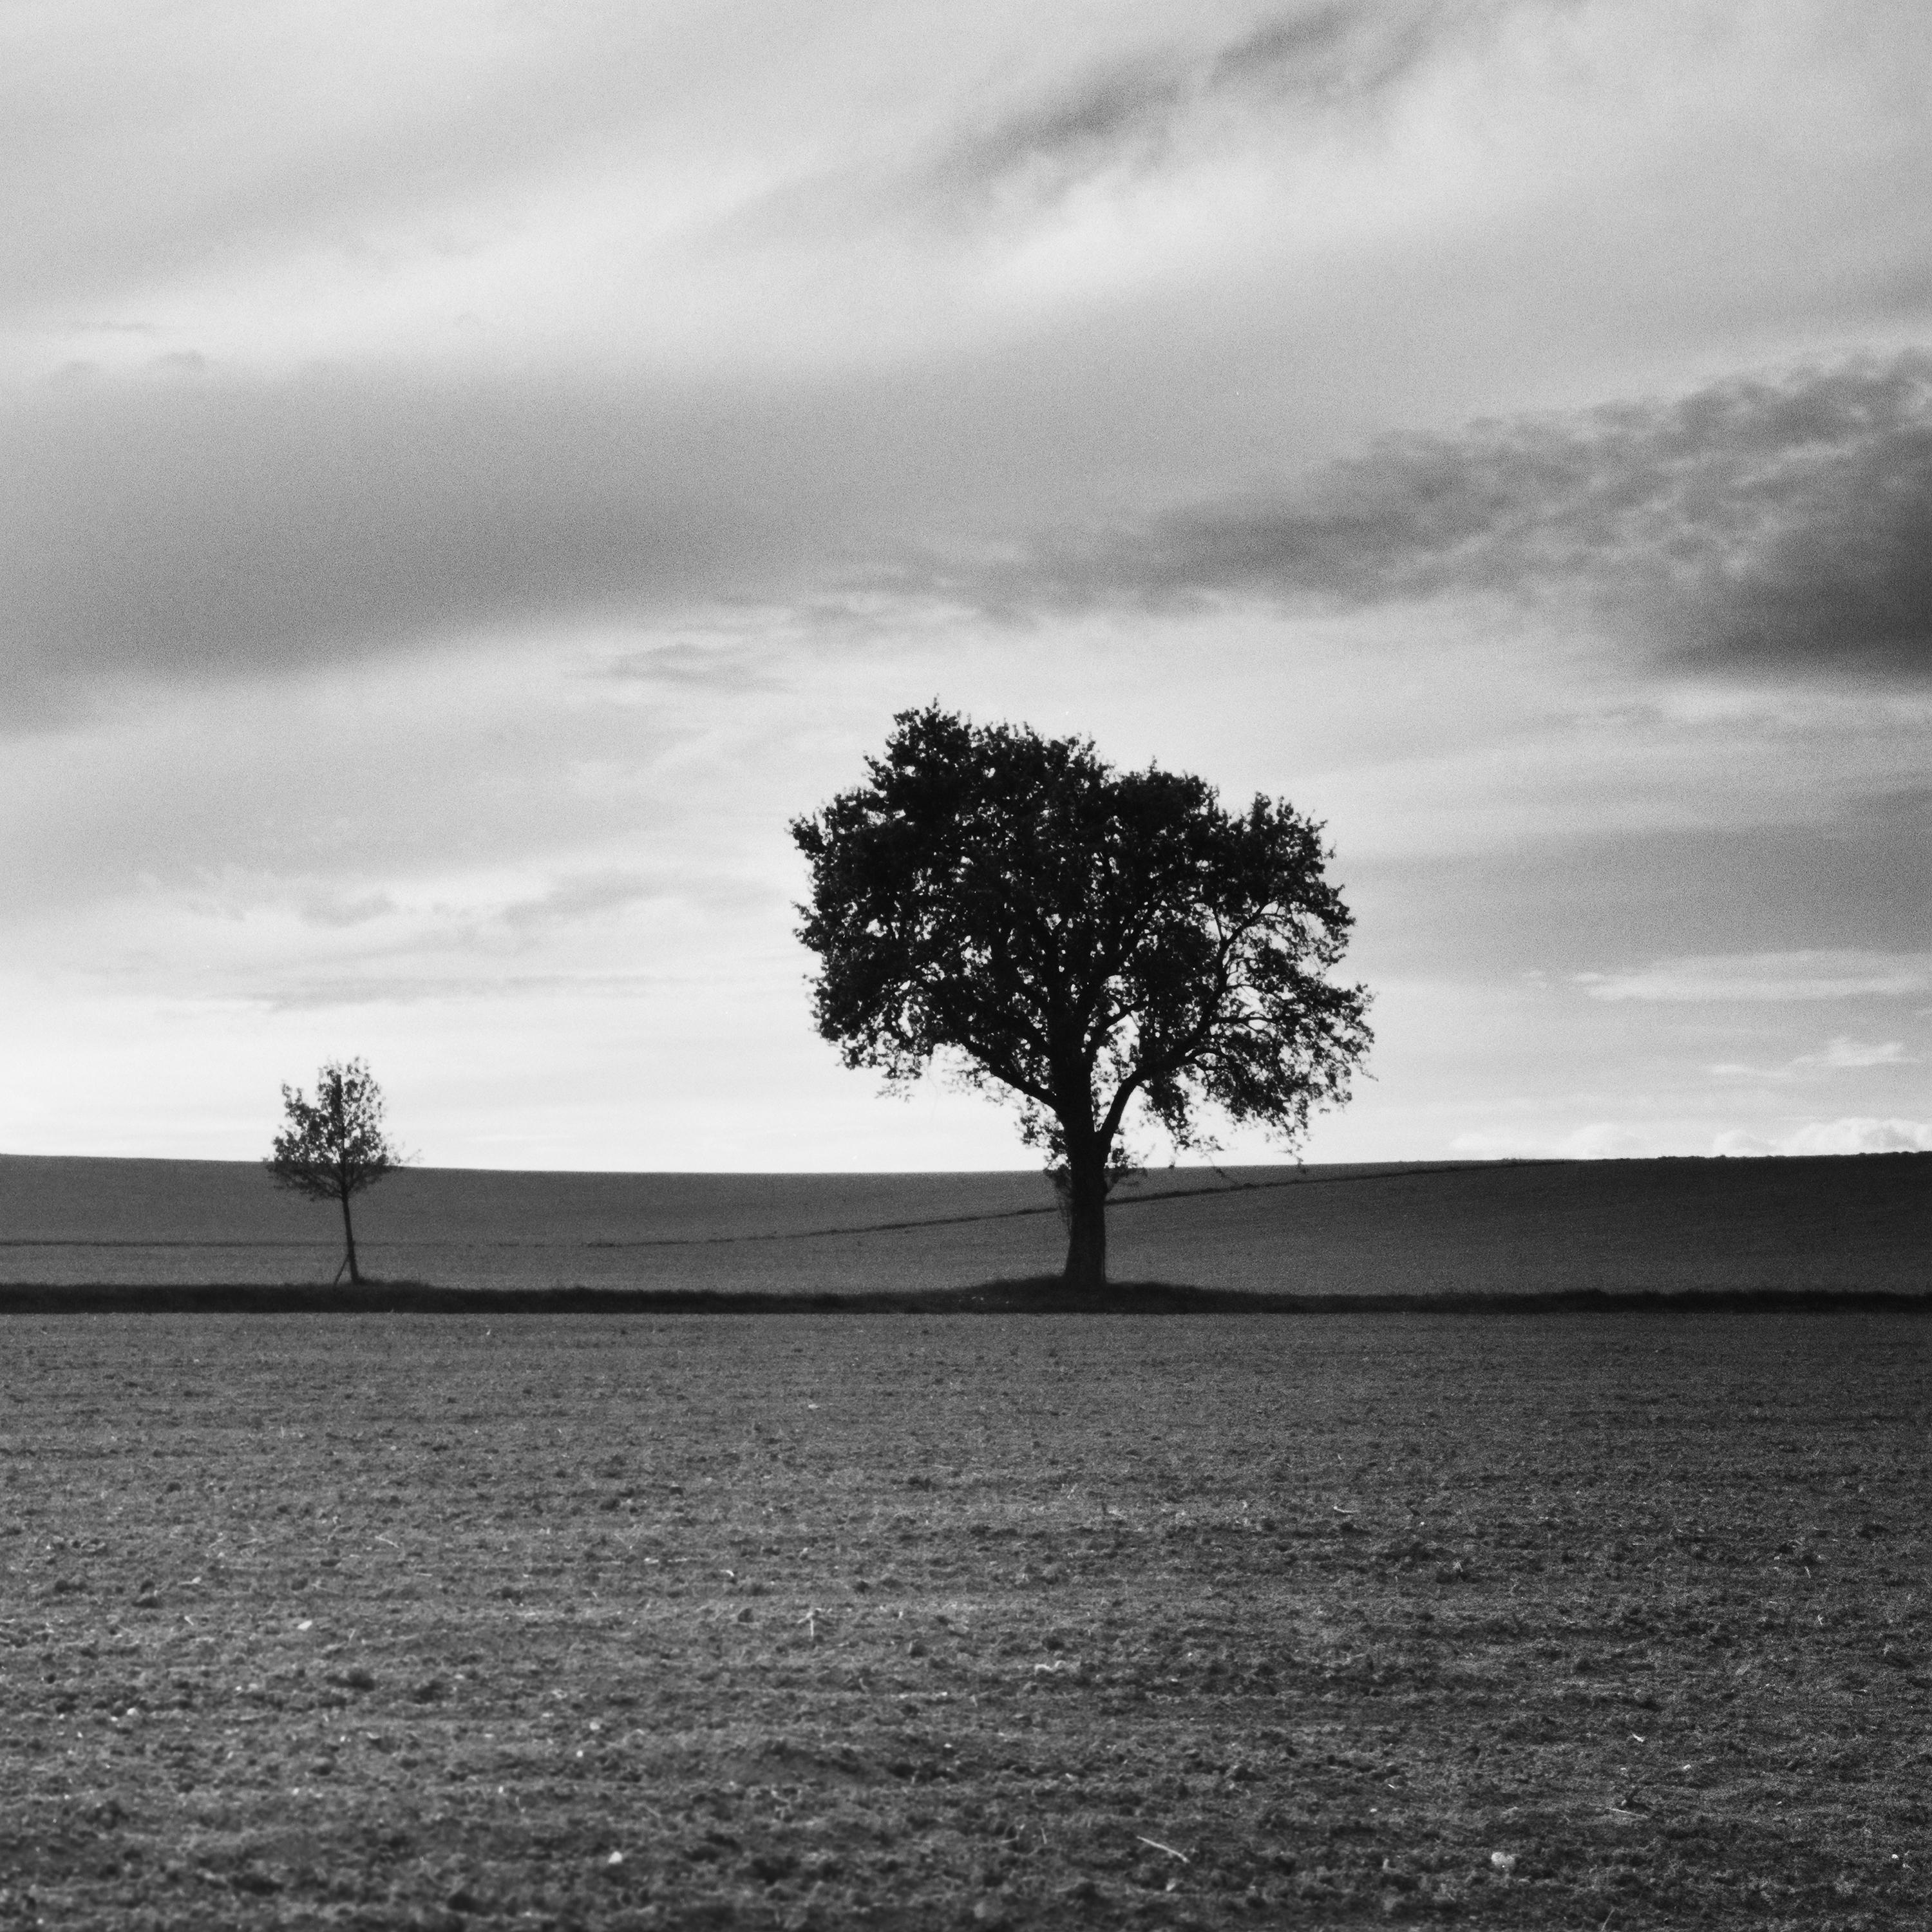 Three and a half Tree, very cloudy, storm, black and white landscape photography For Sale 6